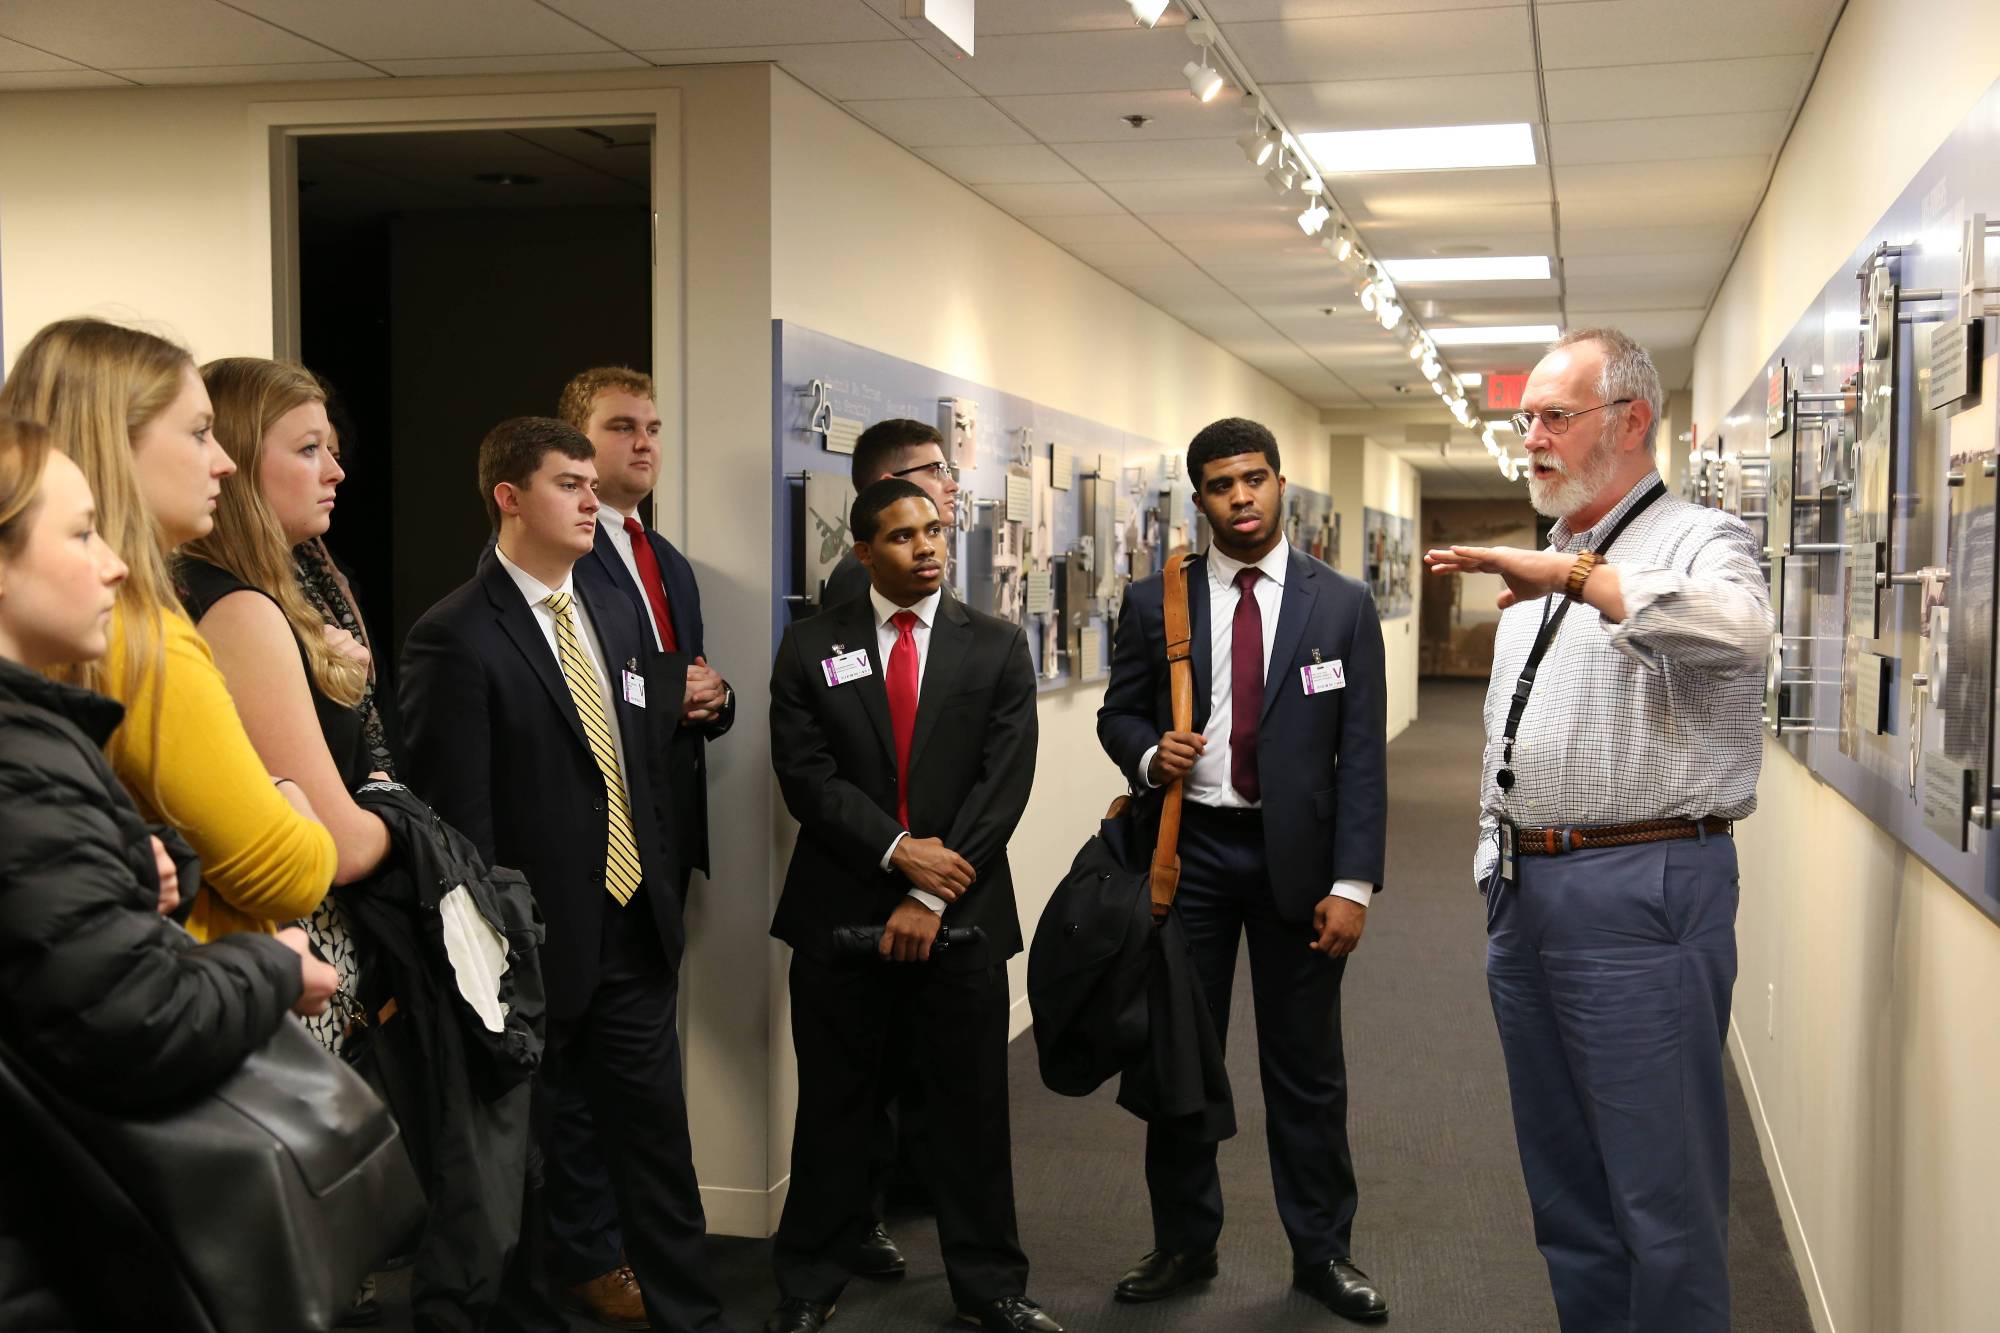 Students on a tour at Lockheed Martin's DC office